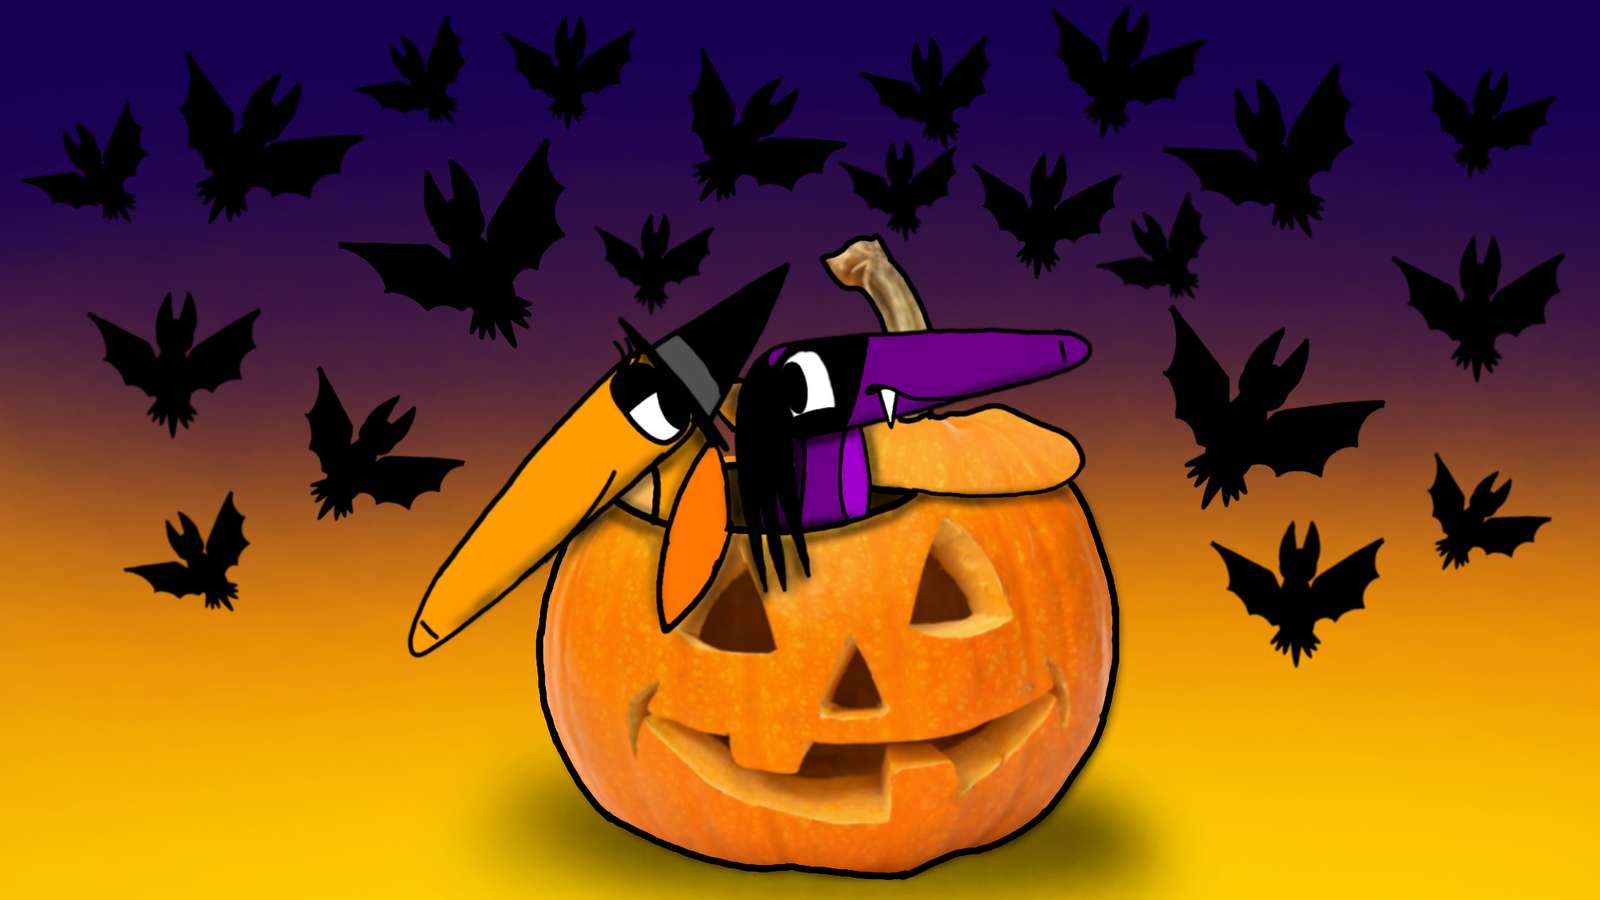 Spooky Fun! puzzle online from photo